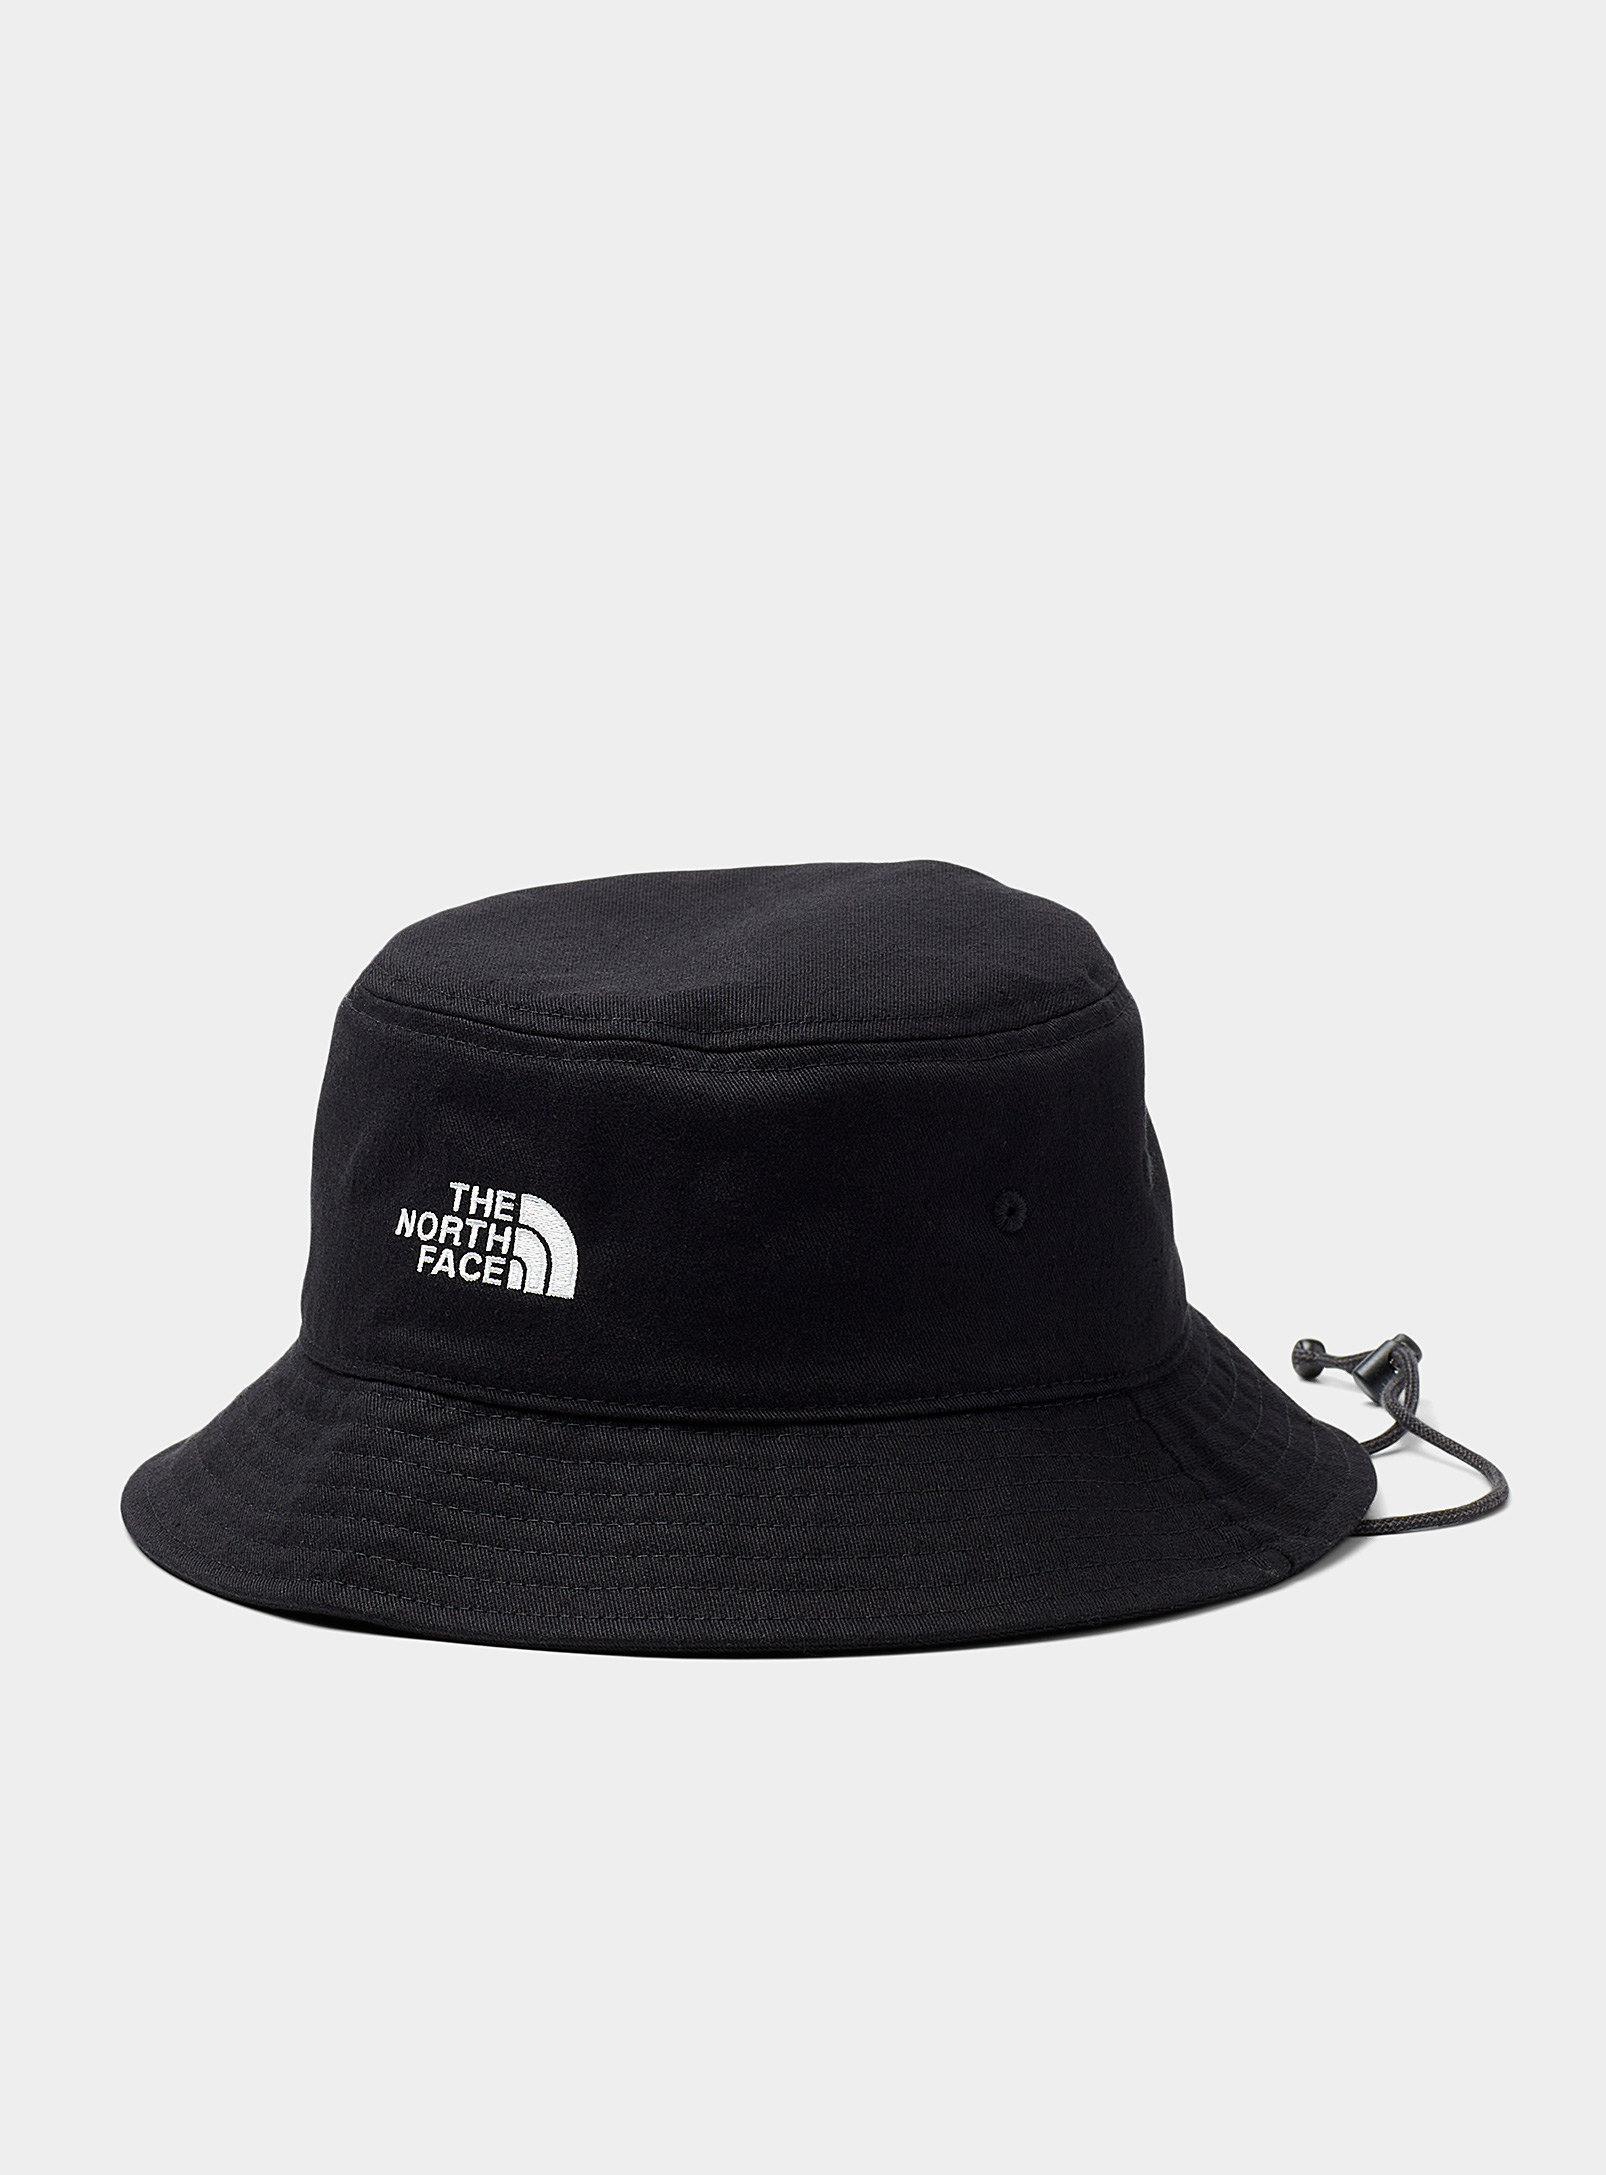 The North Face - Men's Solid logo bucket hat